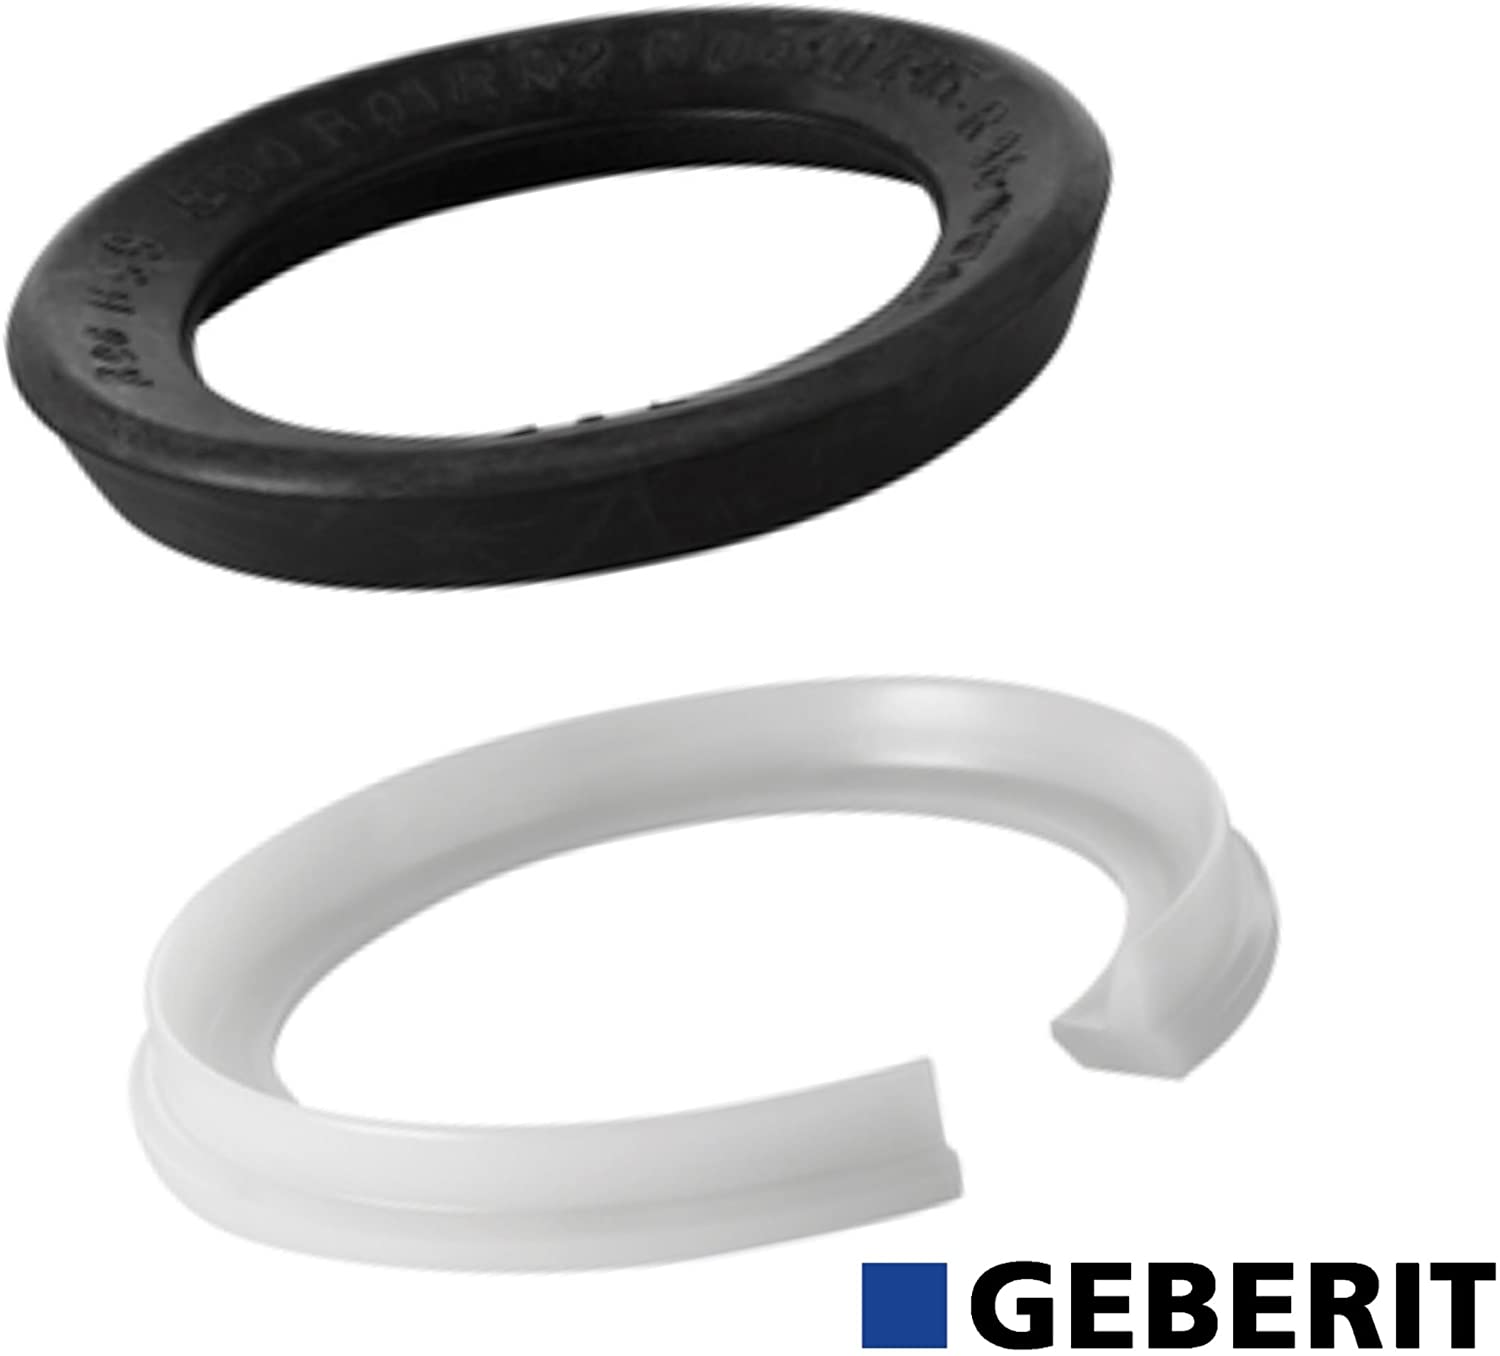 Geberit 50mm Flush Pipe Seal Washer & Clip For Concealed Cistern 240.139.00.1